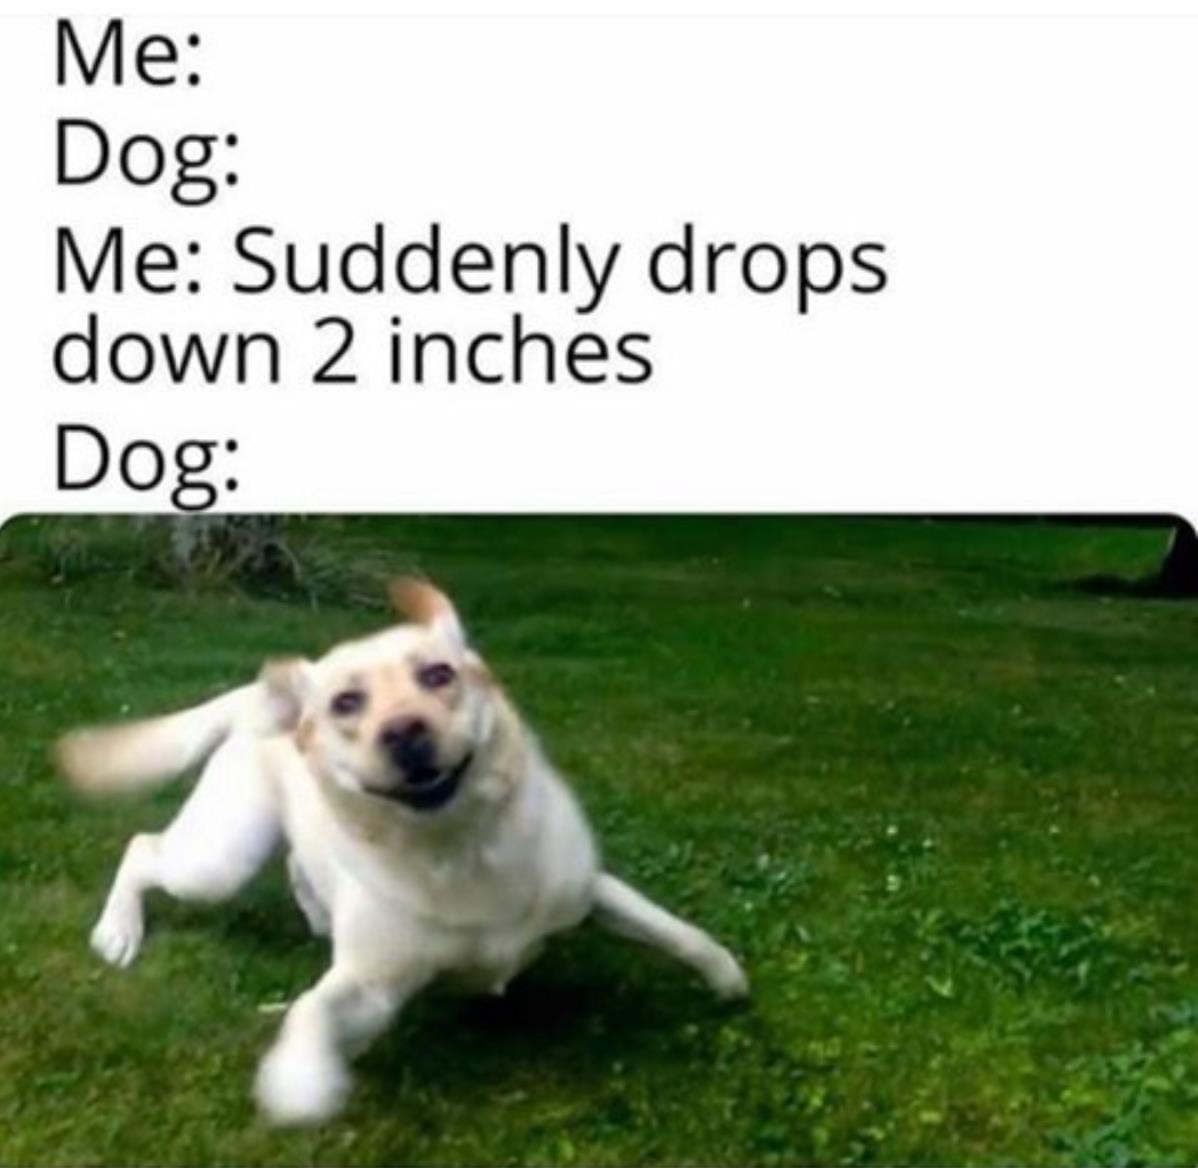 funny dog memes - Me Dog Me Suddenly drops down 2 inches Dog